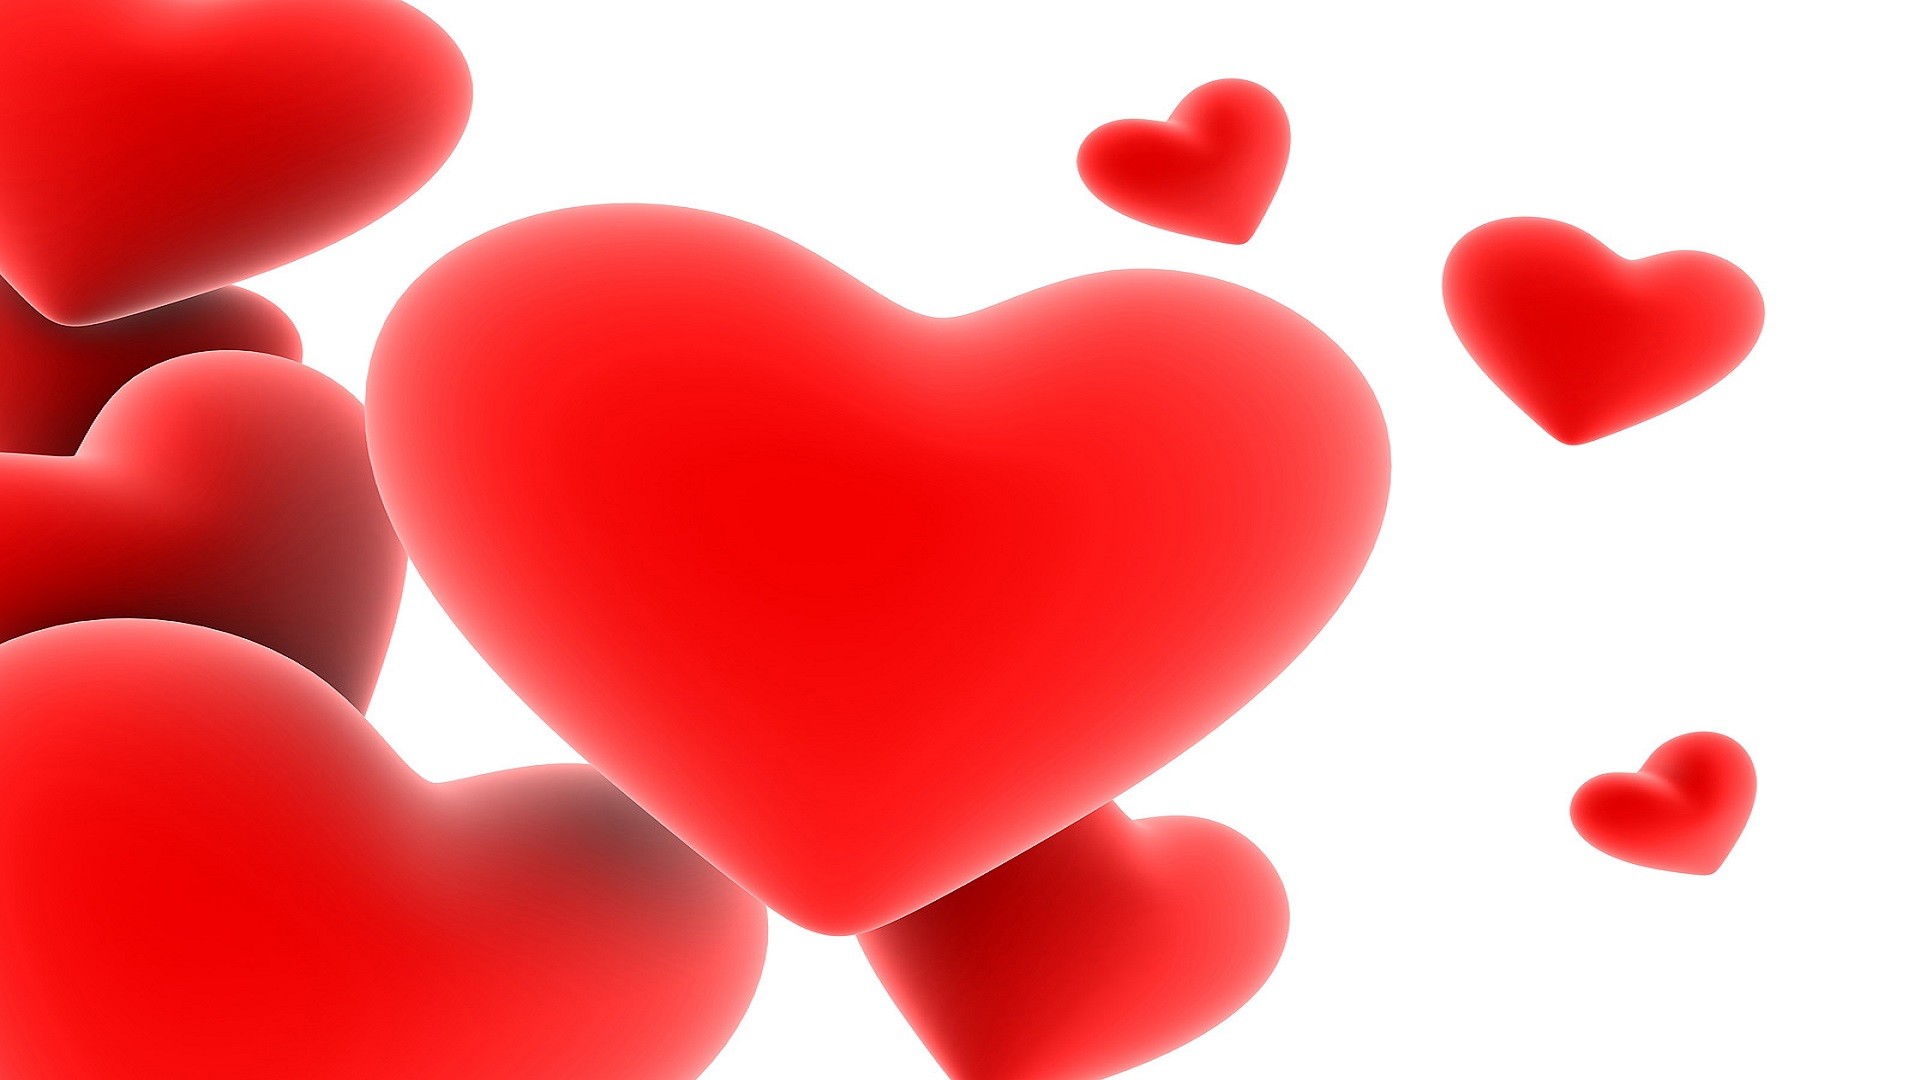 1920x1080 Latest Red Heart hd free wallpaper download 2016